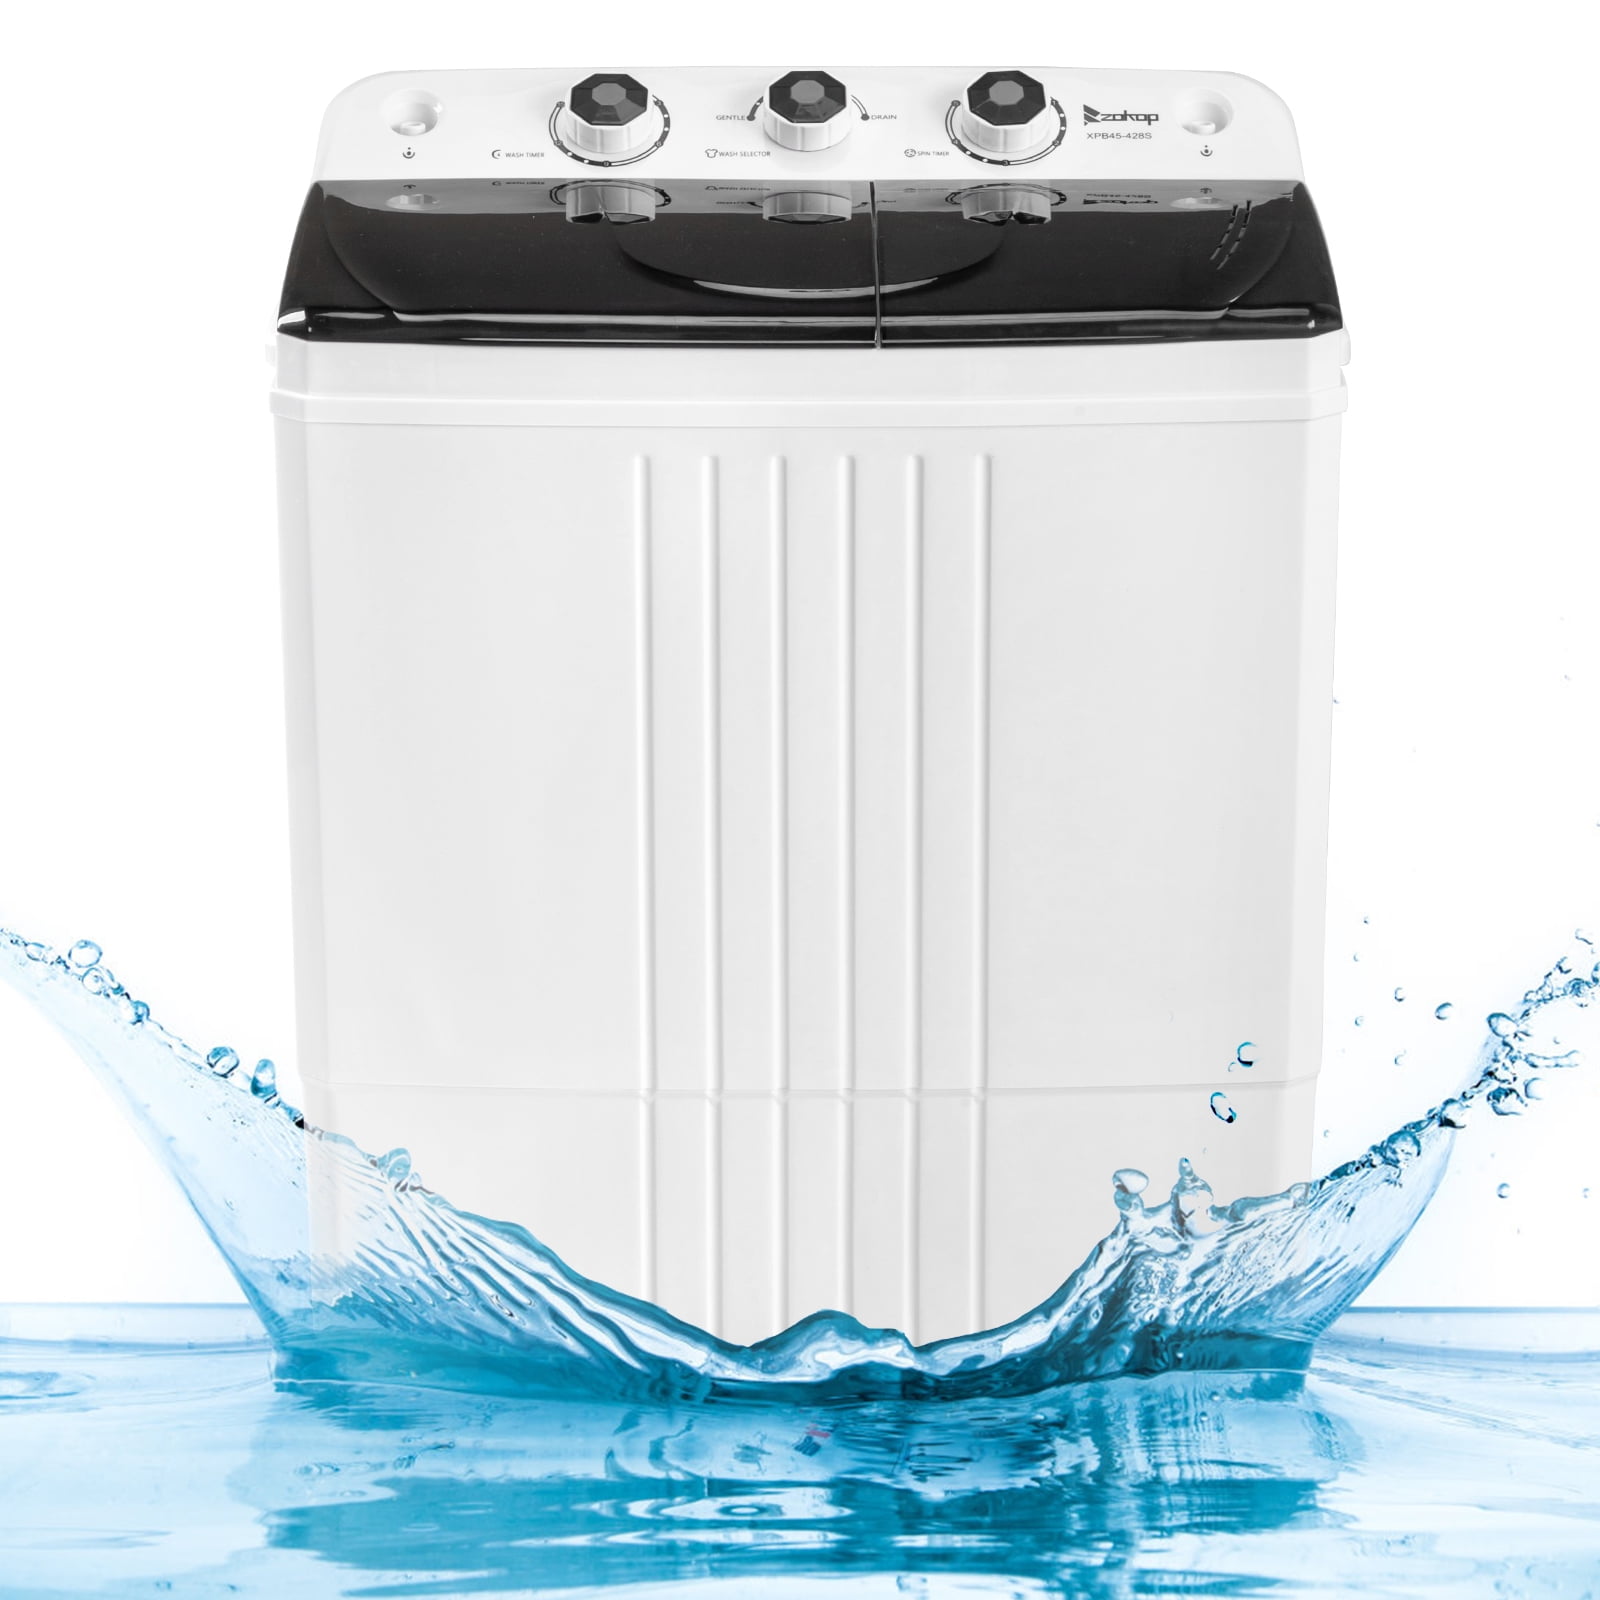 Small Portable Washing Machine, Mini Washer 6.5L High Capacity with 3 Modes  Deep Cleaning for Underwear, Baby Clothes, or Small Items, Foldable Washing  Machine for Apartments, Camping, Travel (Green)..$59.99 For  USA